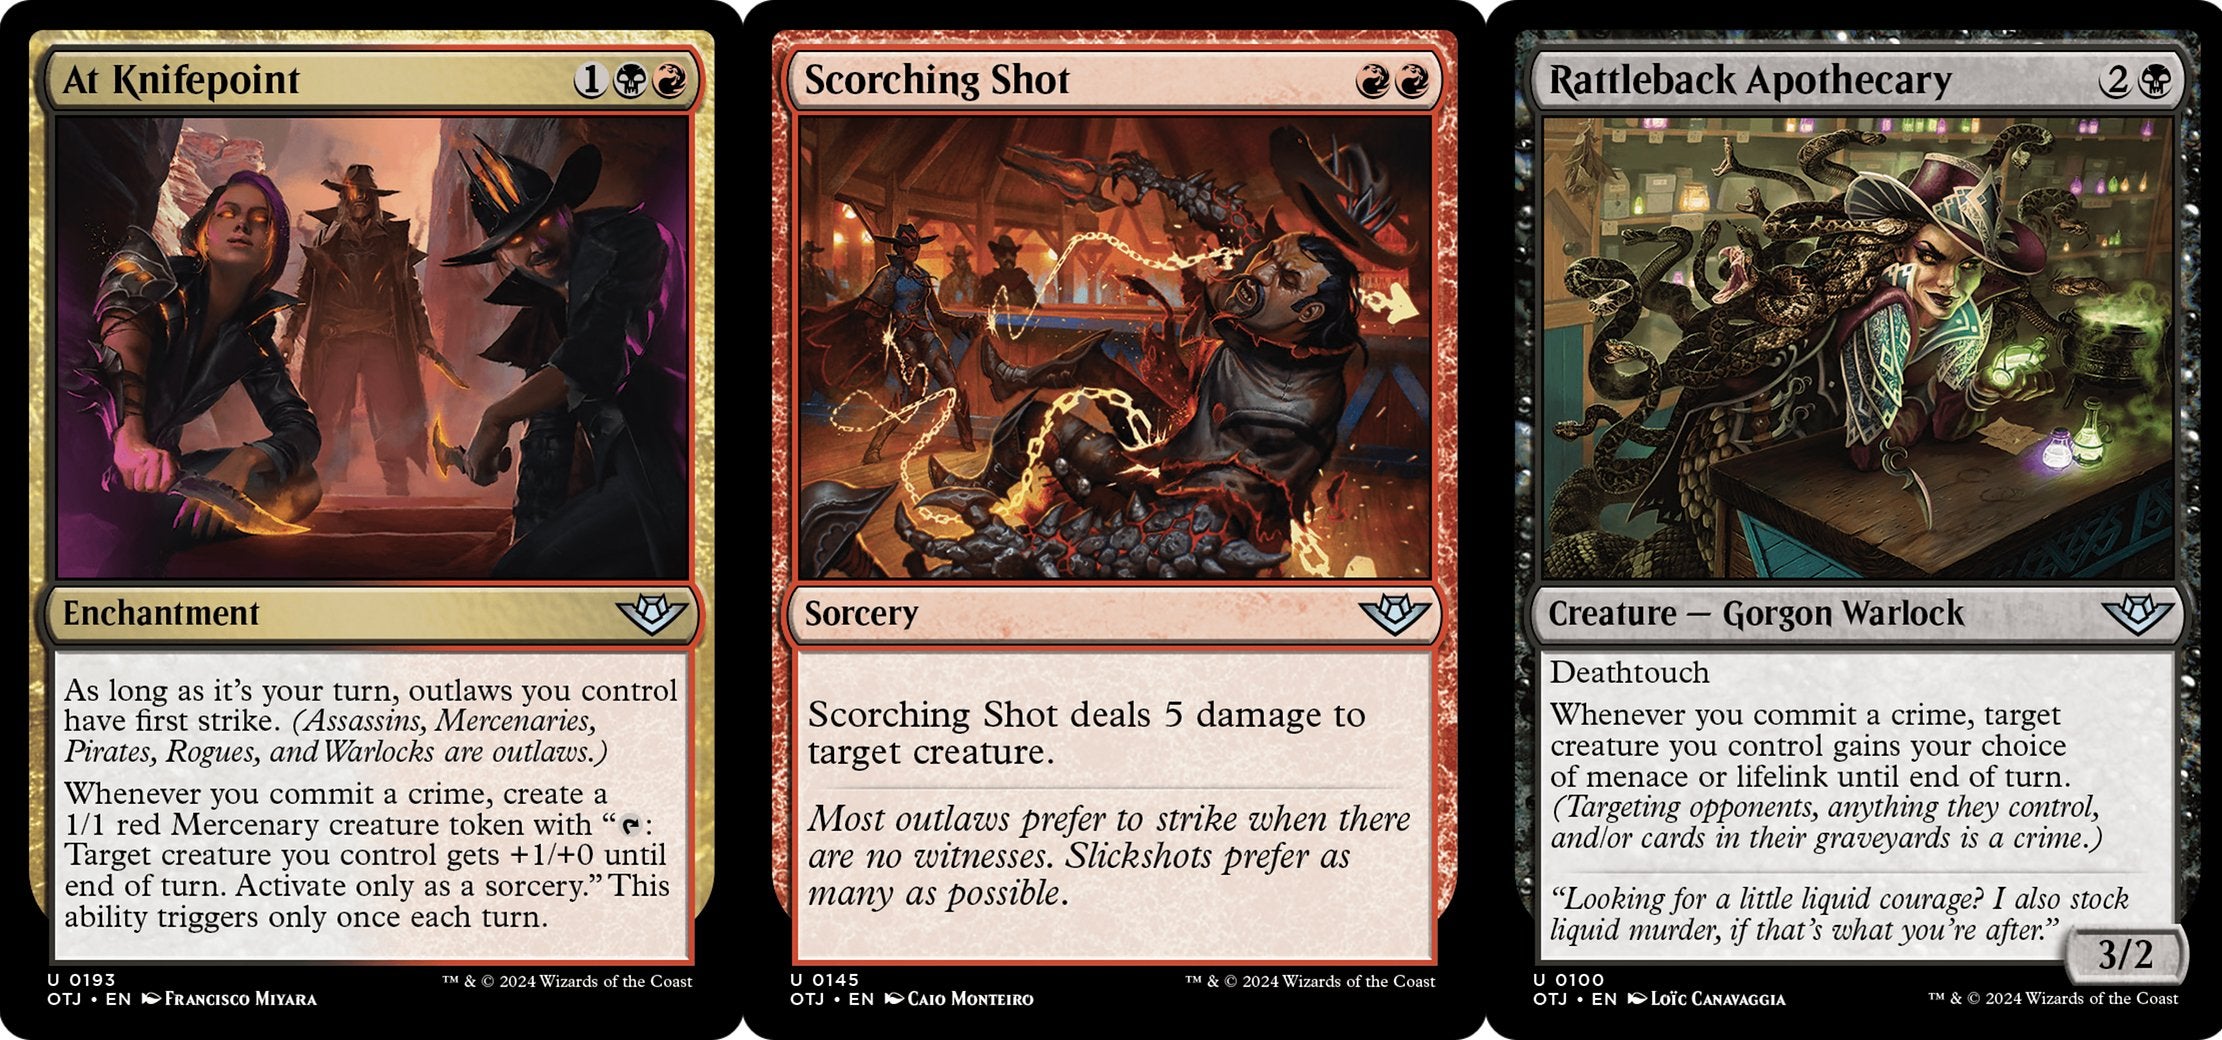 The cards At Knifepoint, Scorching Shot, and Rattleback Apothecary in MTG—two have effects that trigger from committing a Crime.